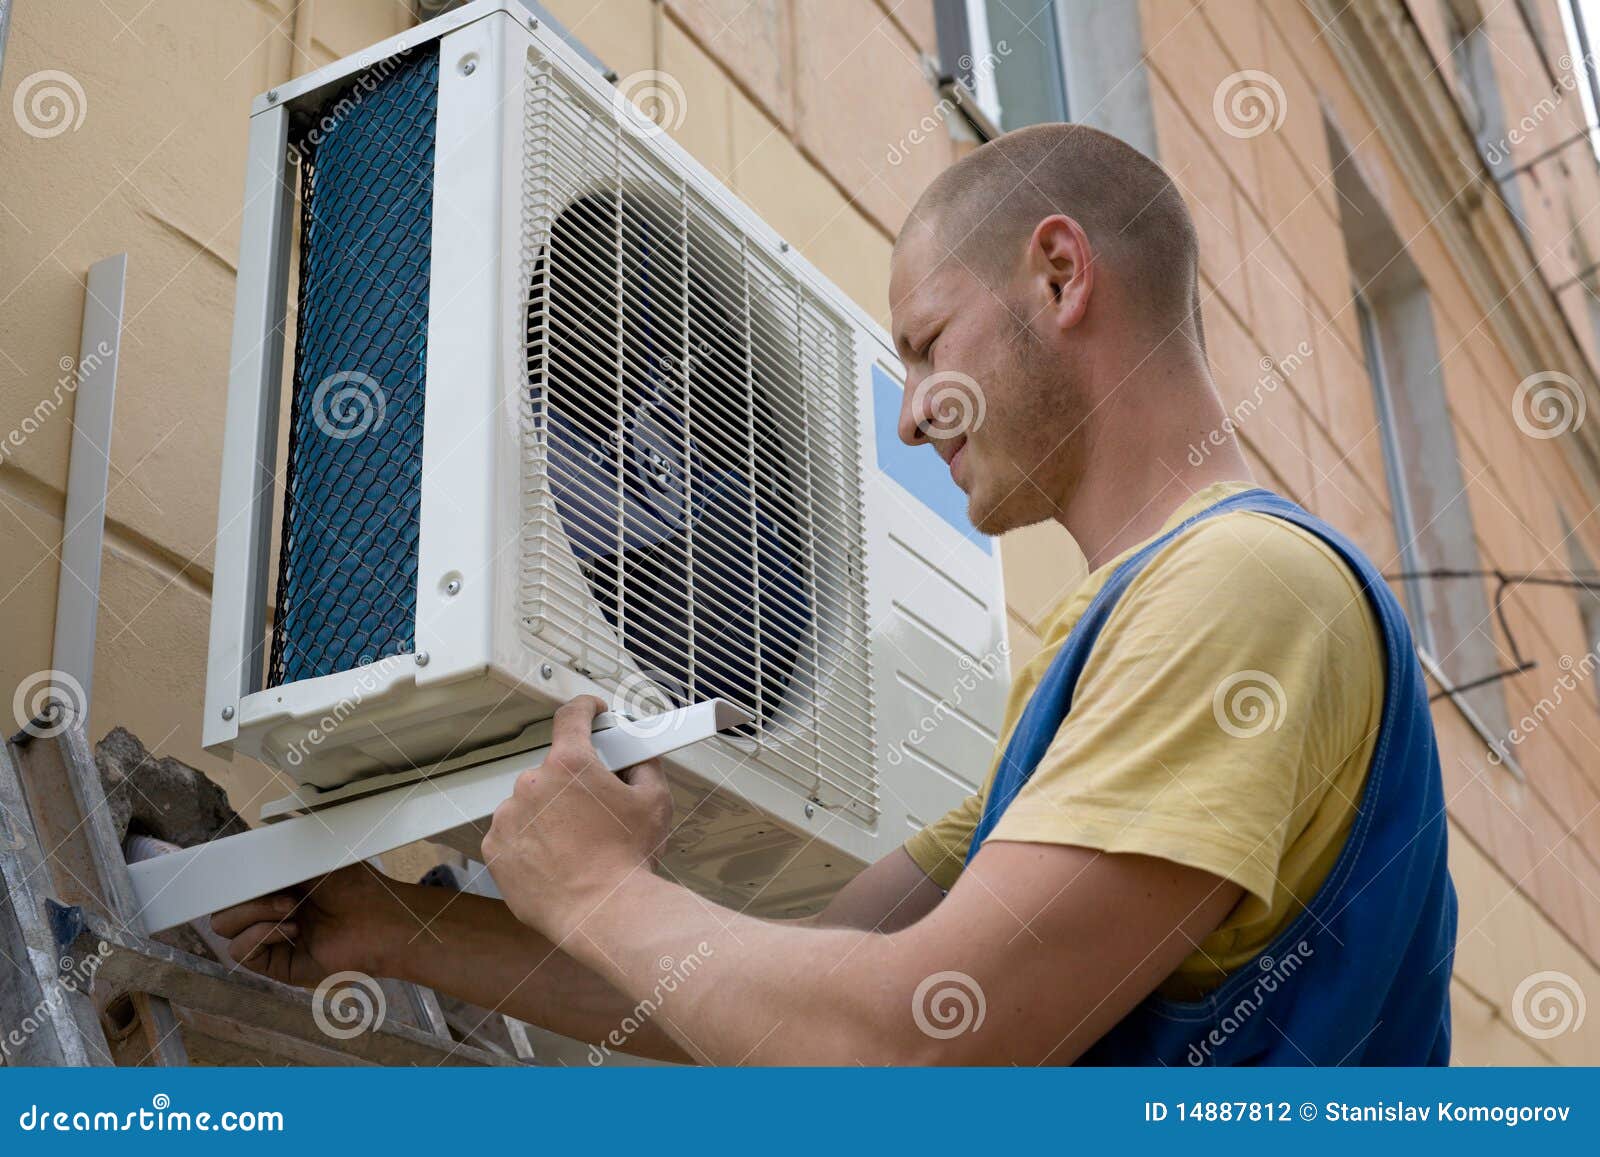 Installer Sets A New Air Conditioner Stock Photo Image of adjuster